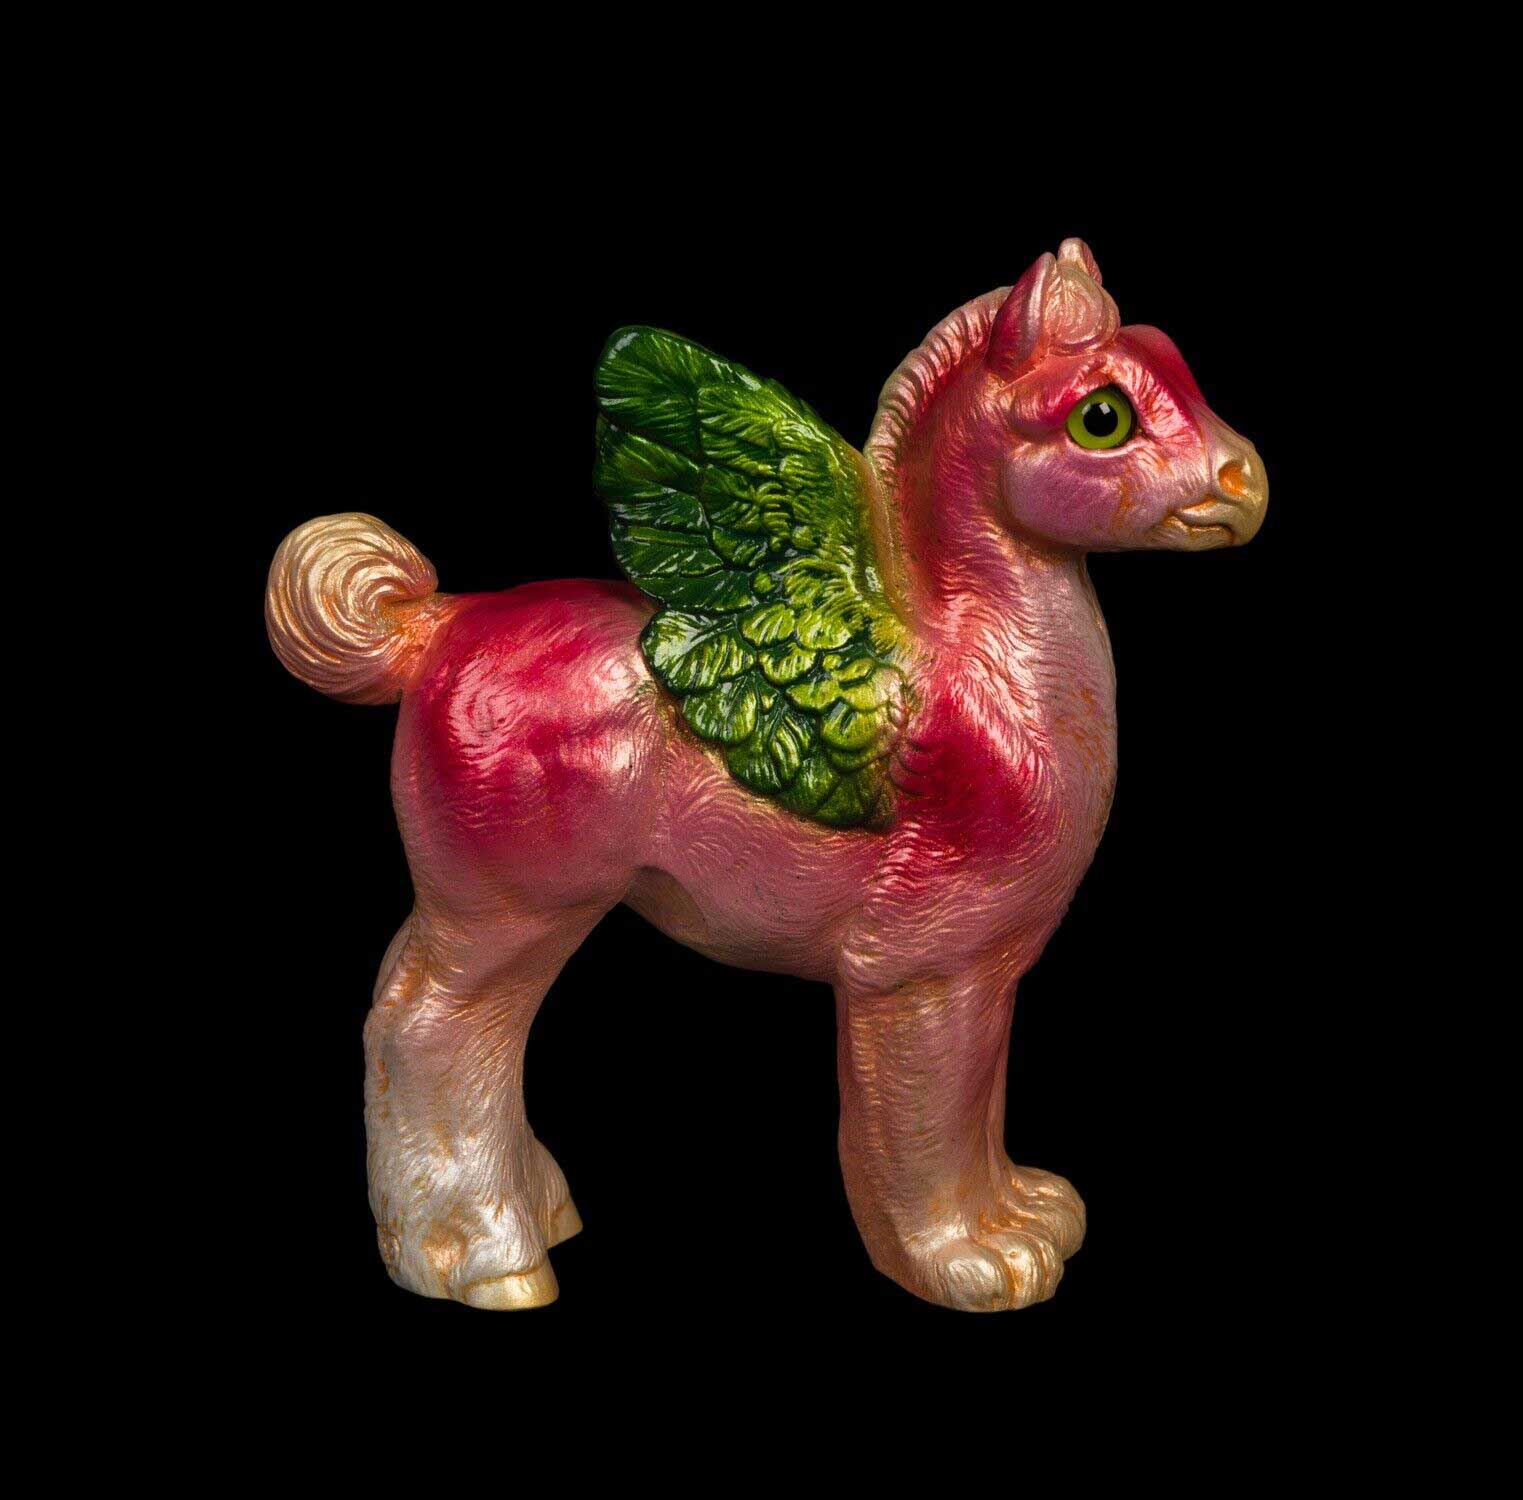 20230930-Royal-Peach-Standing-Hippogriff-Colt-Test-Paint-1-by-Gina